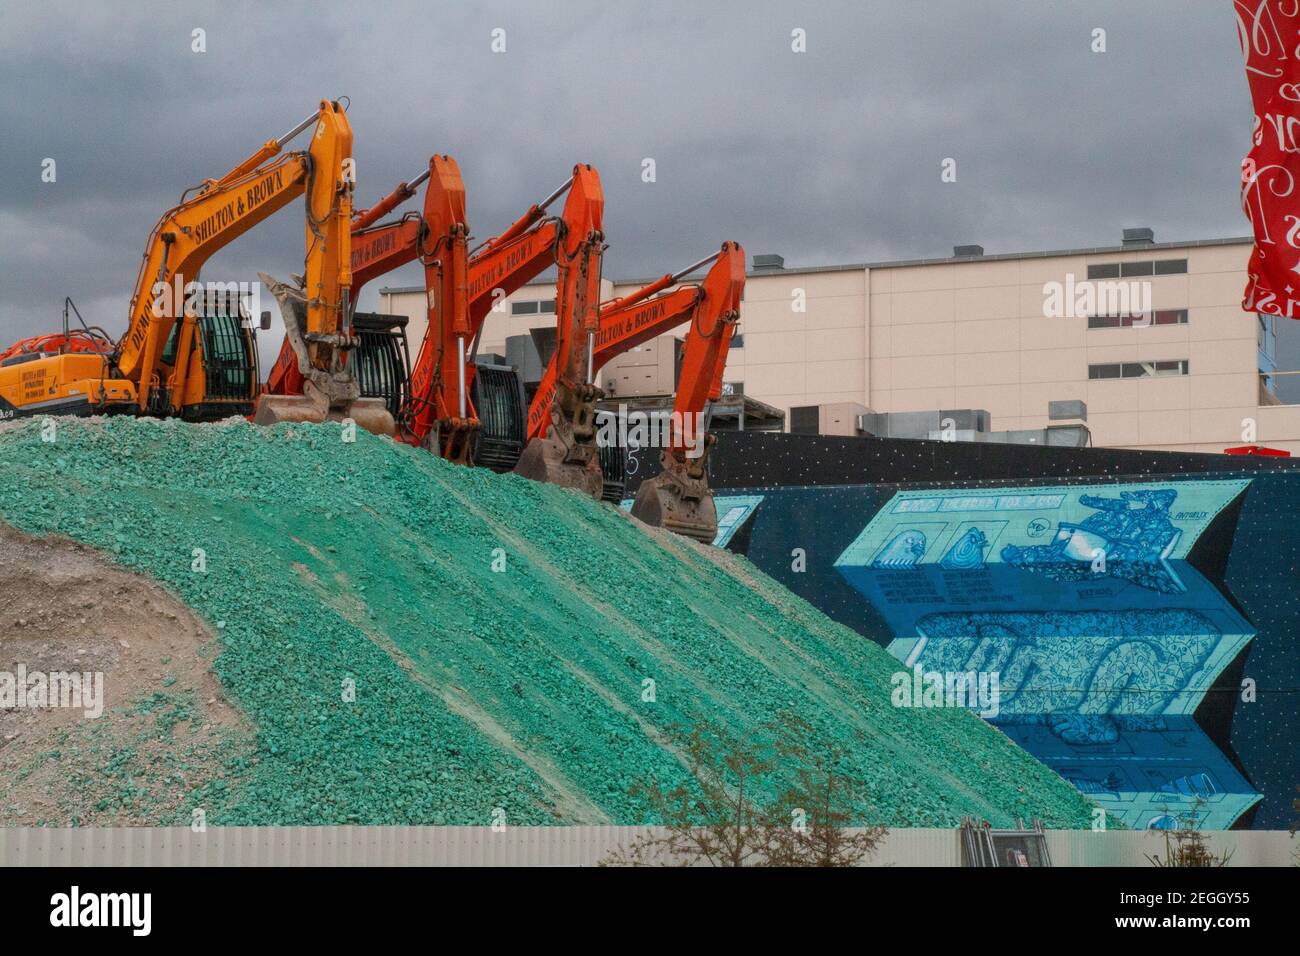 Group of excavators on gravel hill, city central recovery after Chirstchurch earthquake, New Zealand Stock Photo